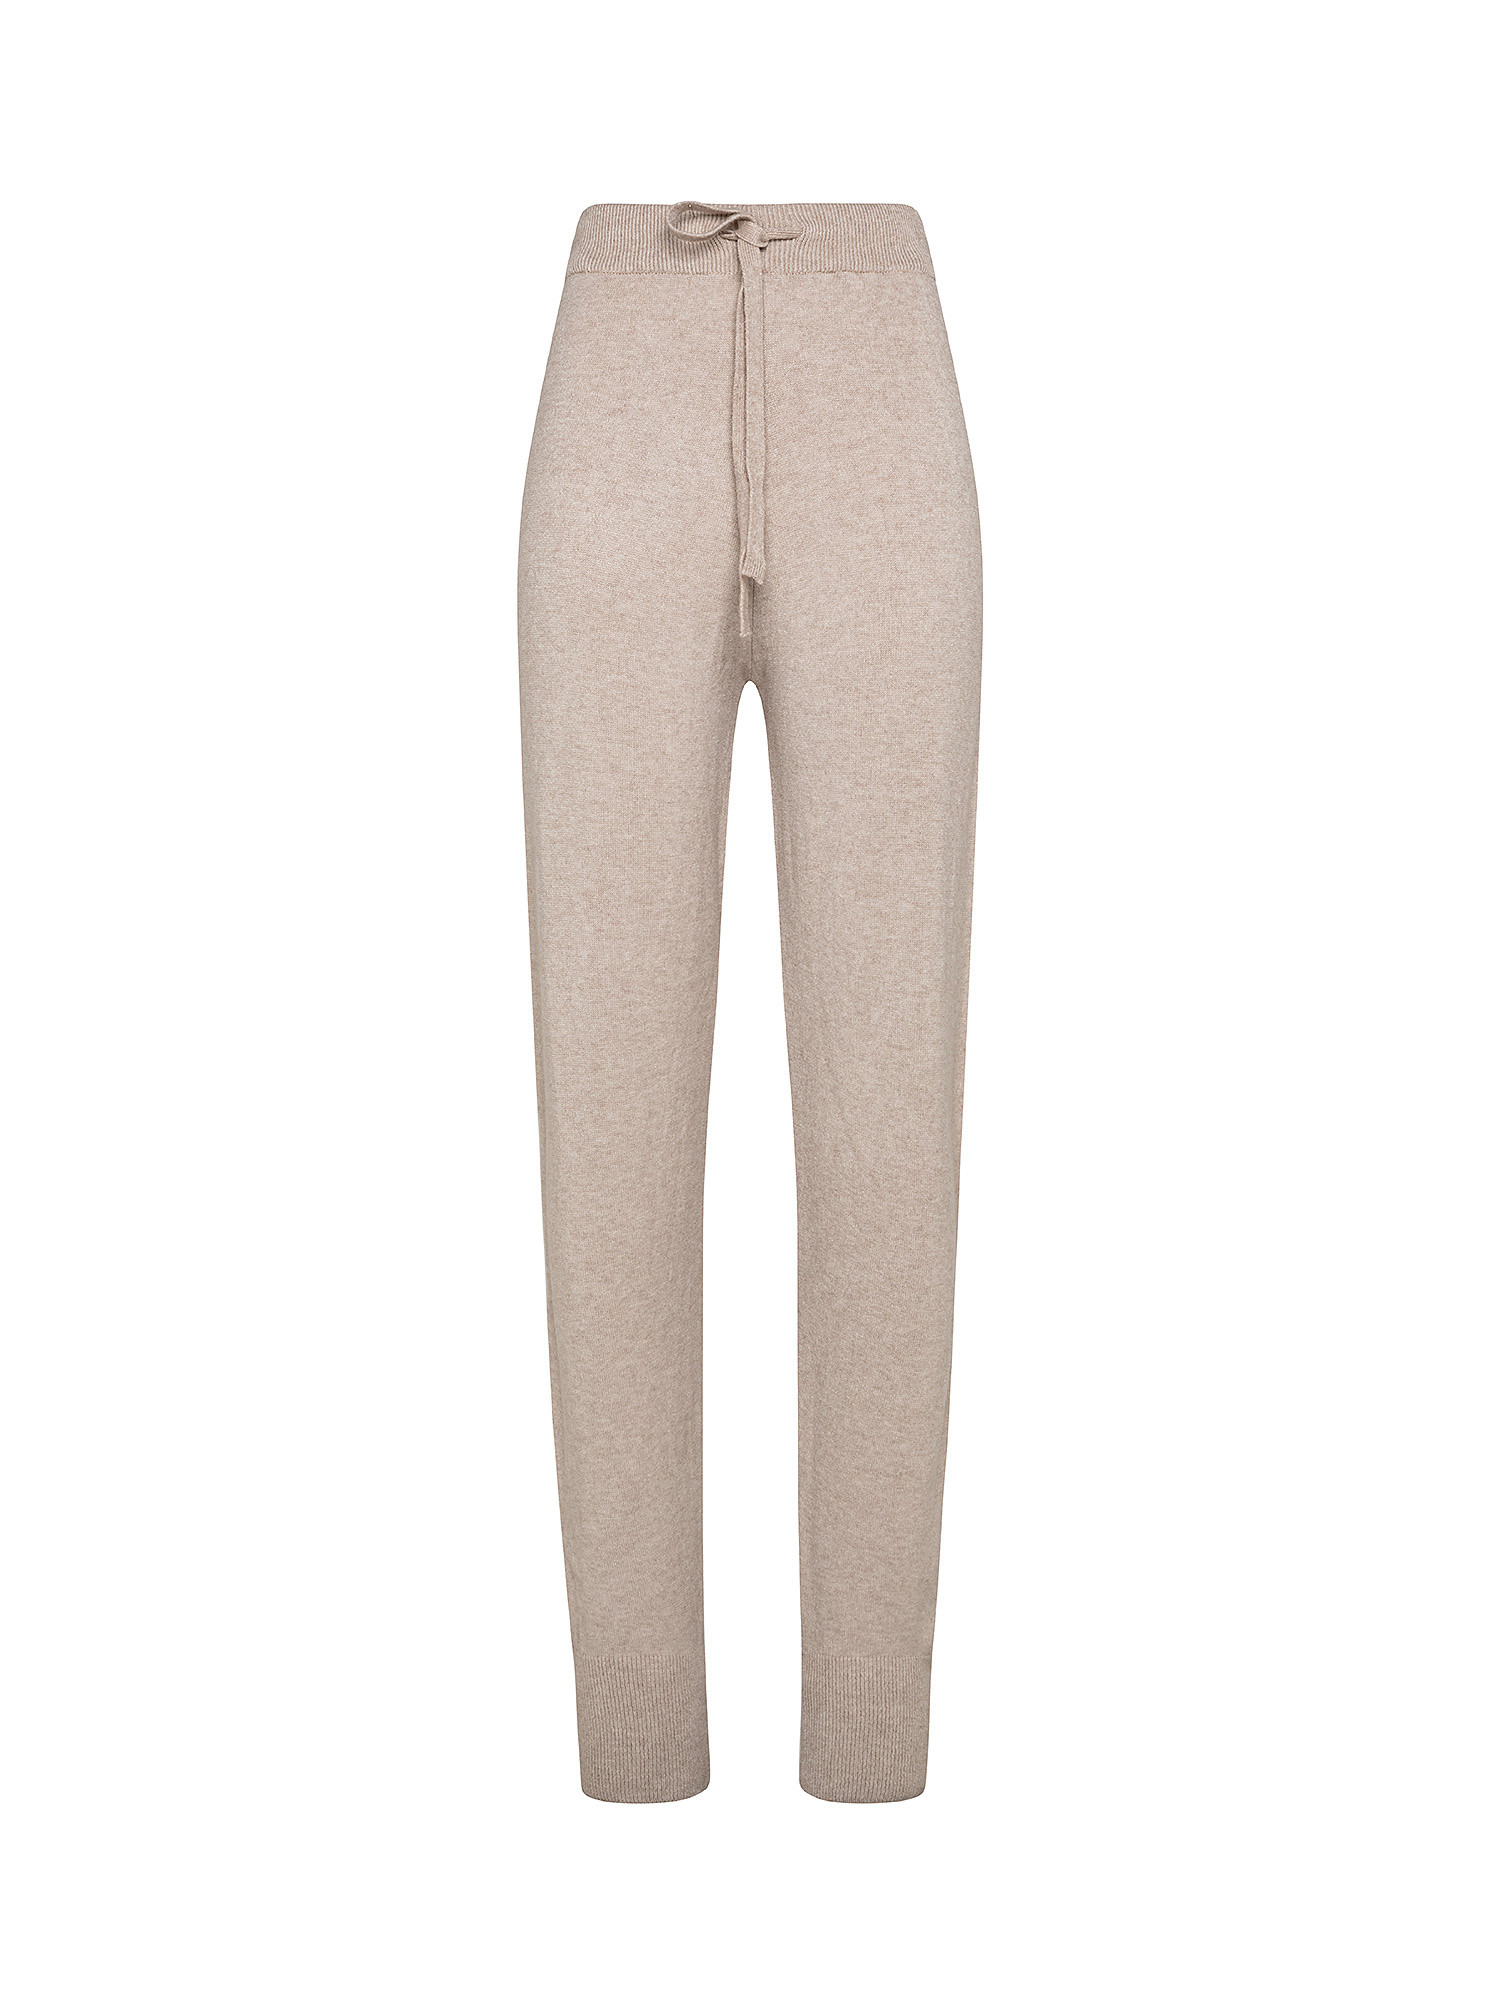 Knitted trousers, Beige, large image number 0